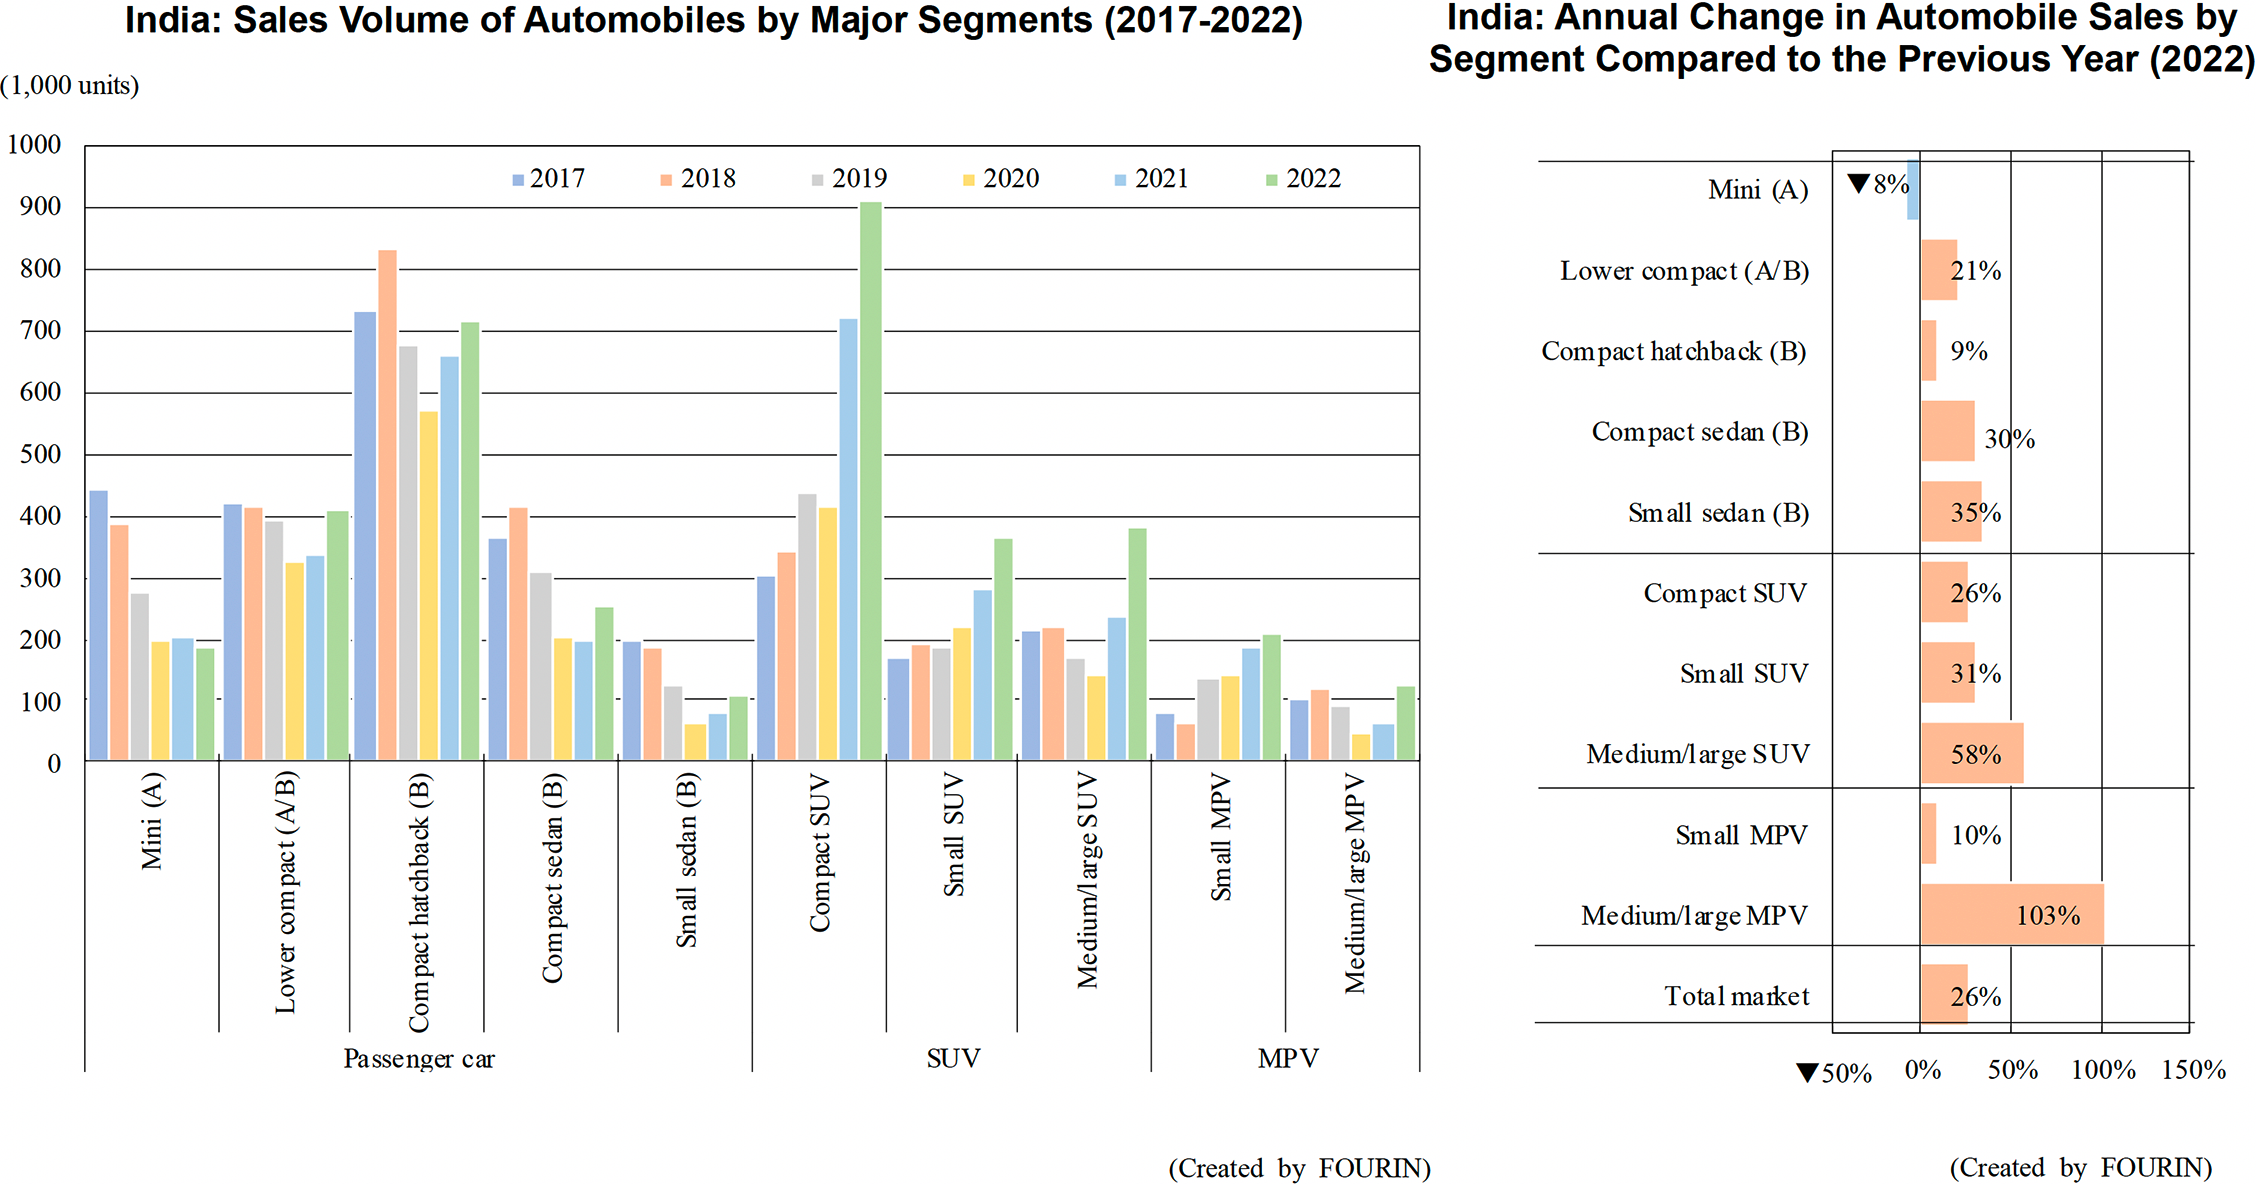 Bar graph: India: Sales Volume of Automobiles by Major Segments (2017-2022) / Bar graph: India: Annual Change in Automobile Sales by Segment Compared to the Previous Year (2022)